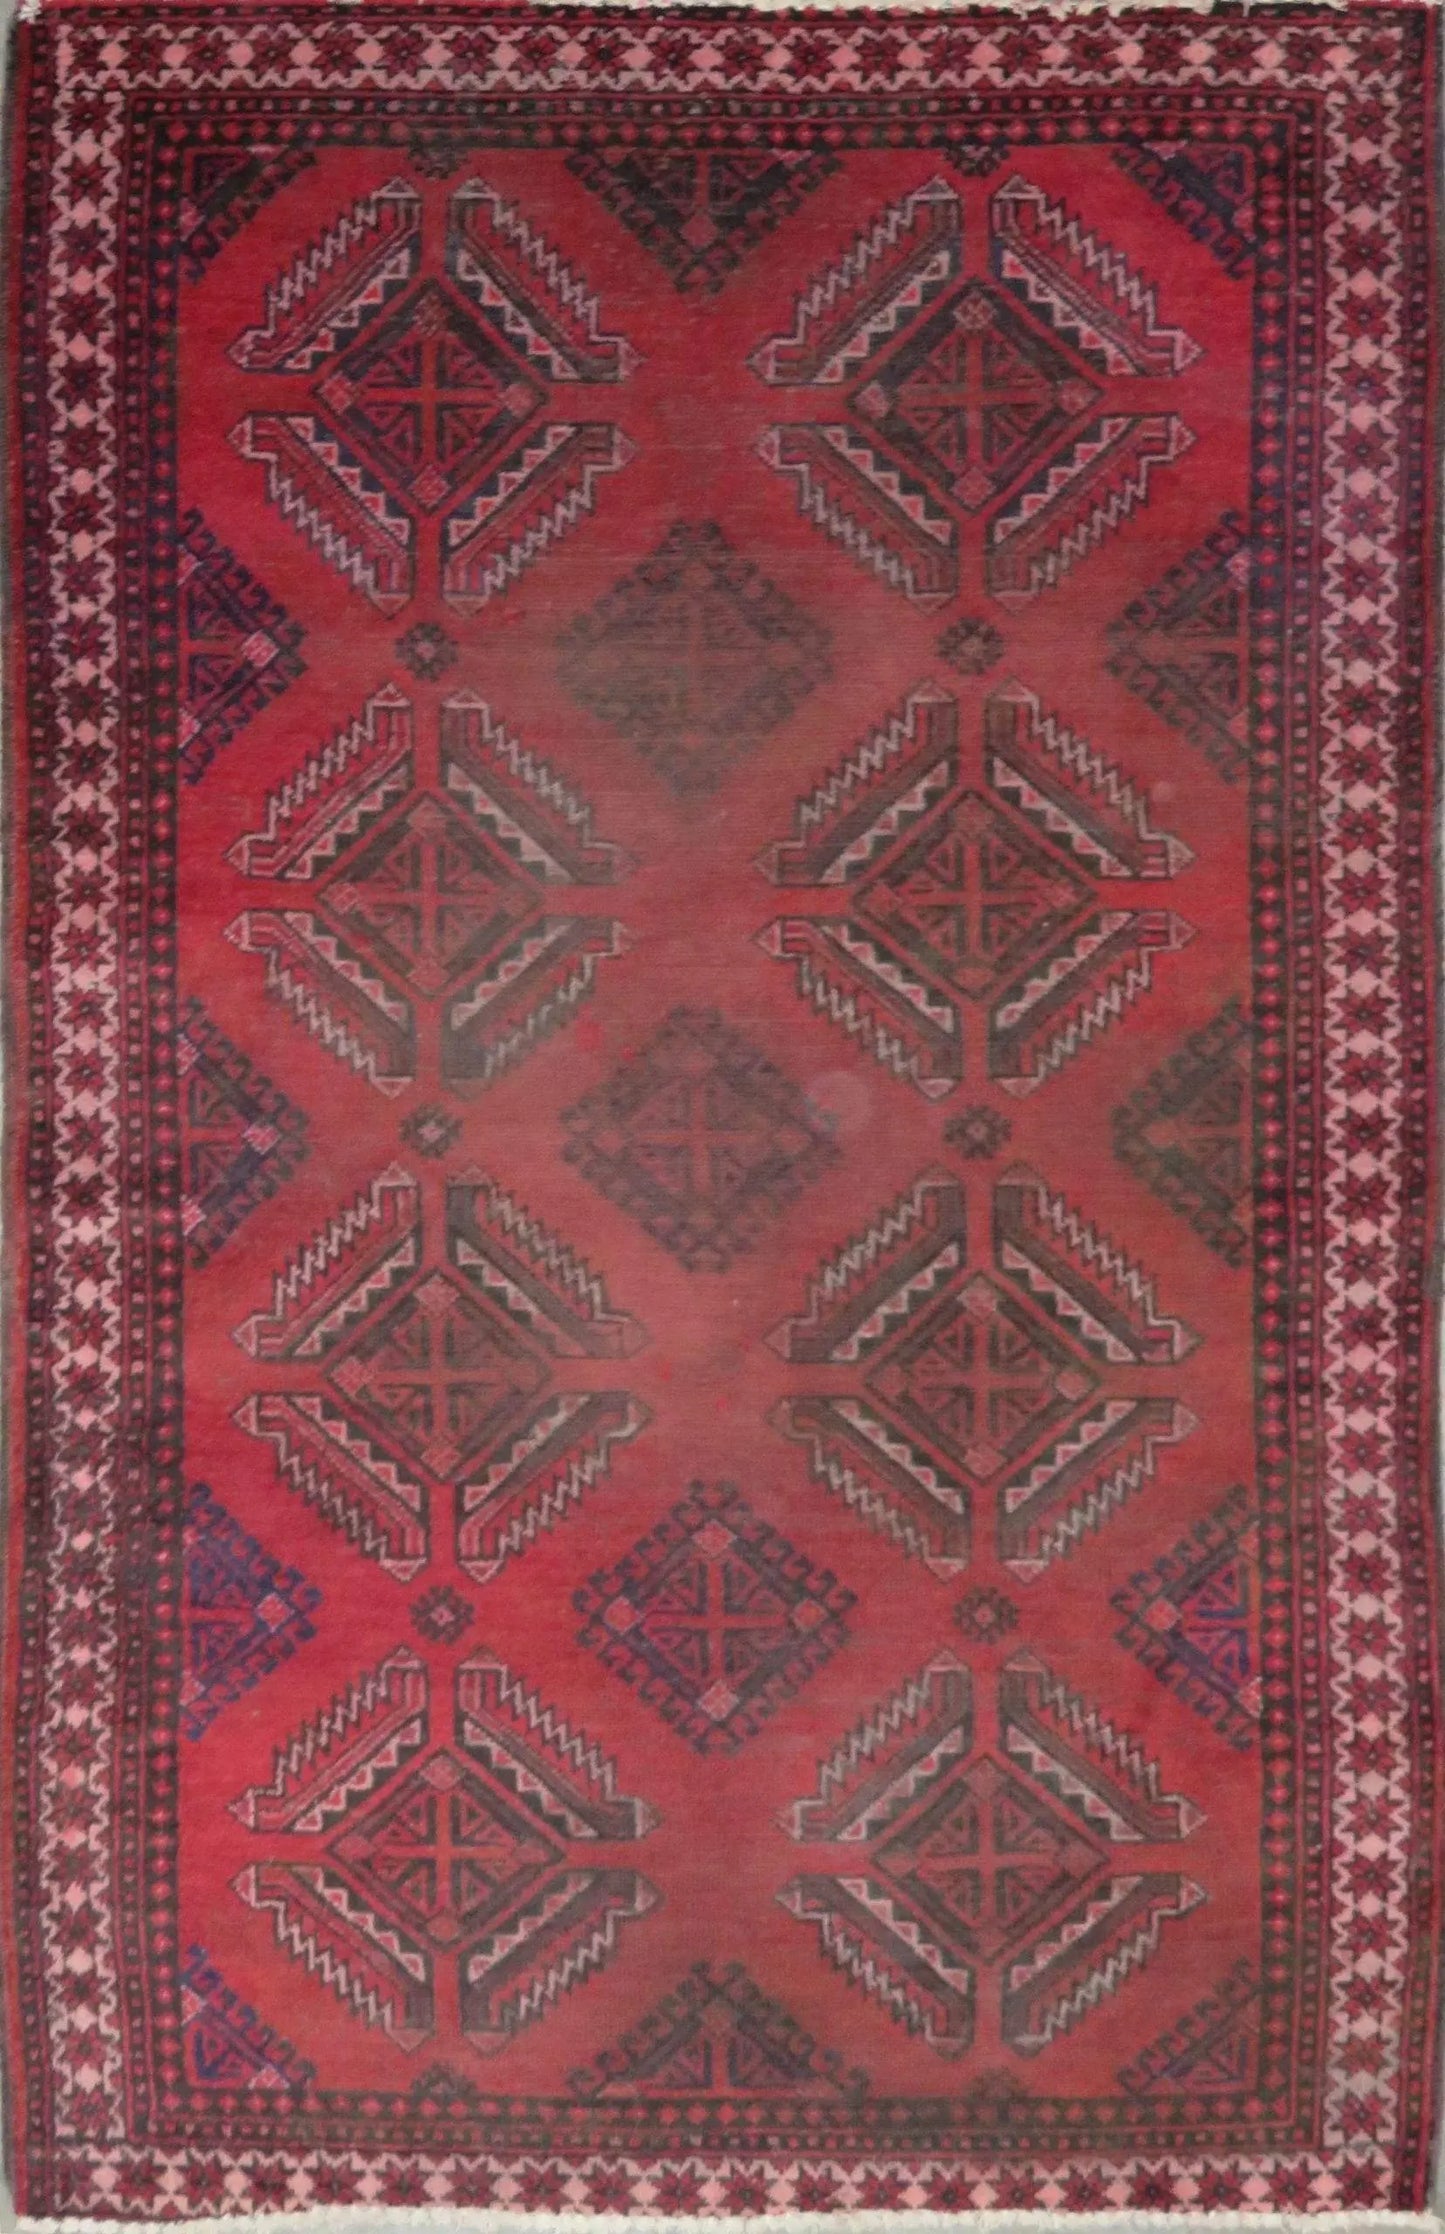 Hand-Knotted Persian Wool Rug _ Luxurious Vintage Design, 6'2" x 3'9", Artisan Crafted